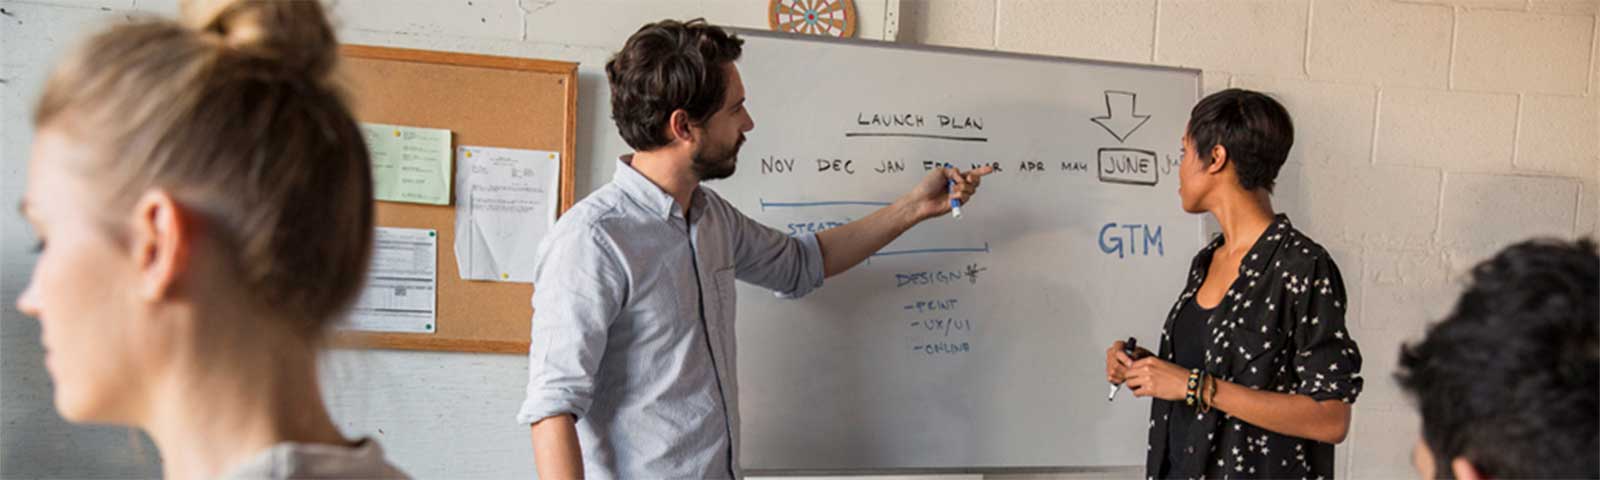 Two people working at a white board